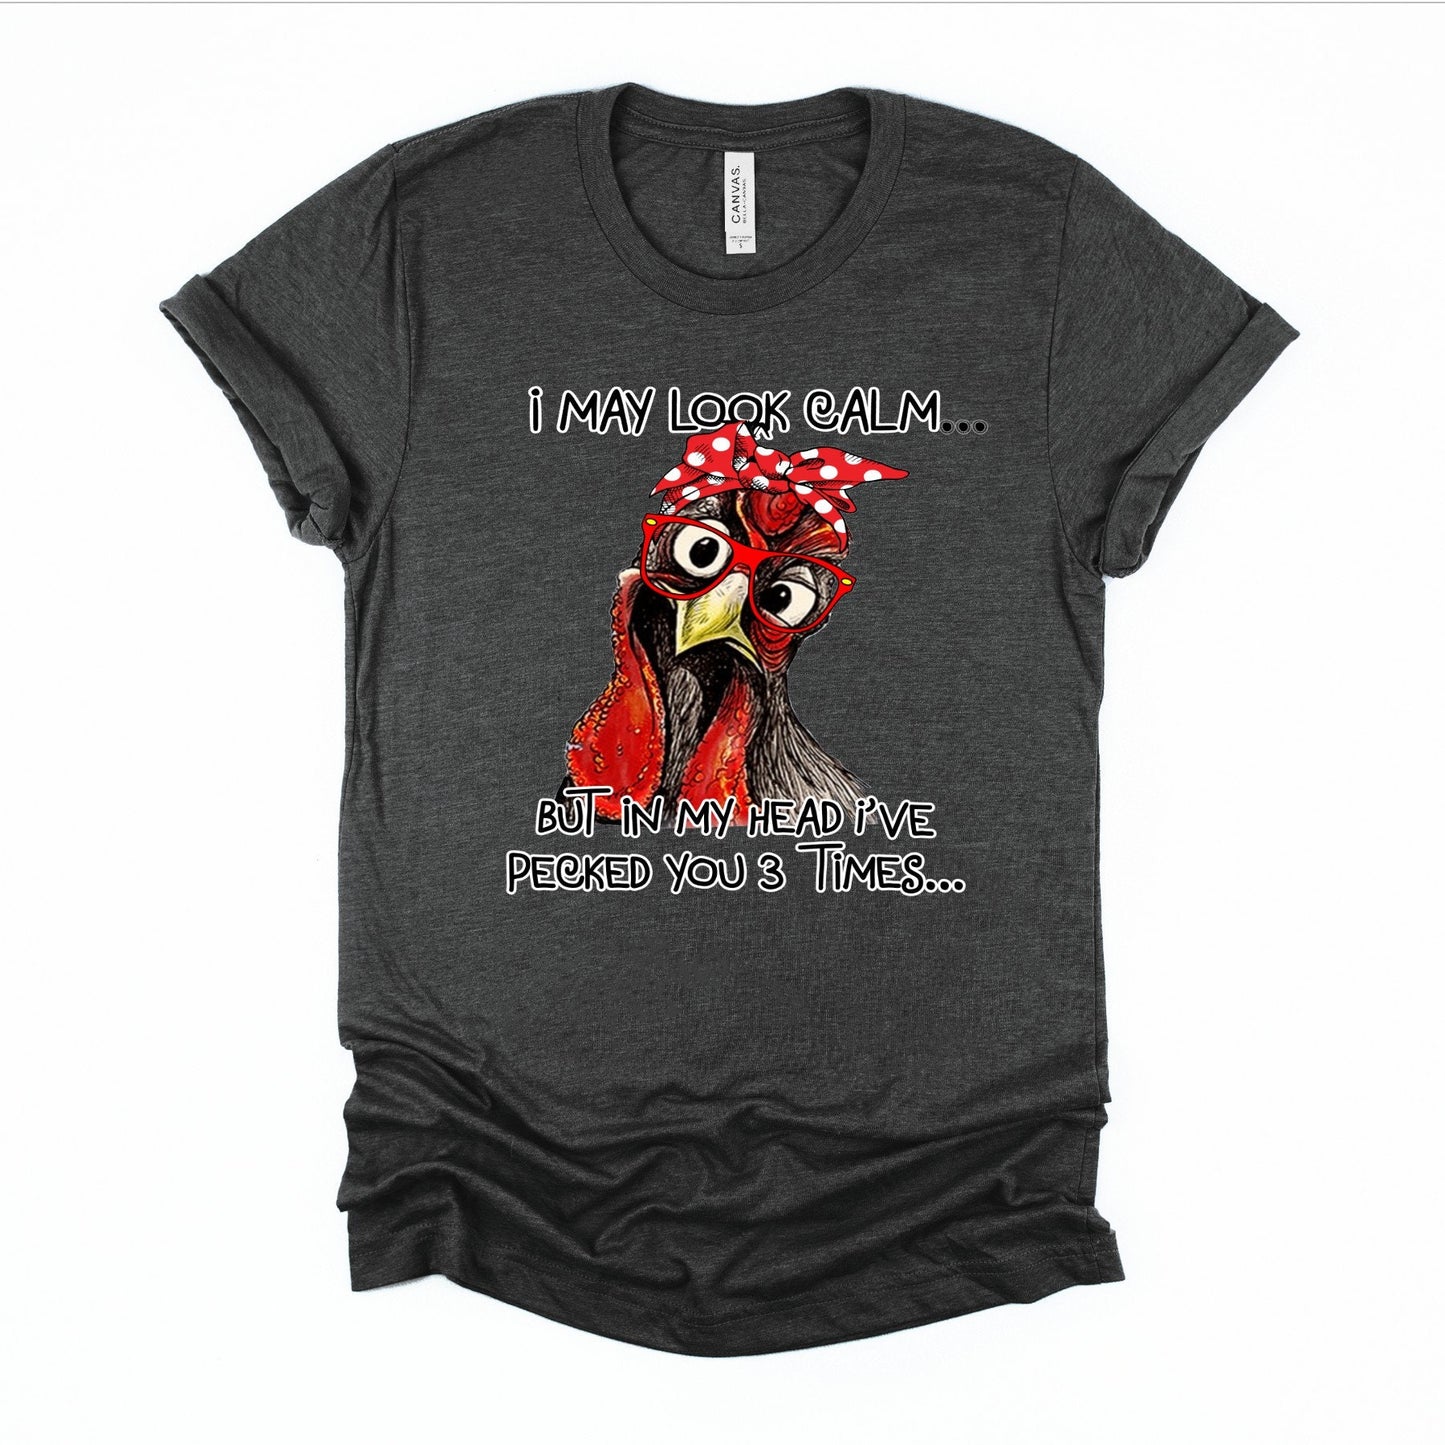 Chicken Rooster I May Look Calm But in My Head I have Pecked You 3 Times. Chicken shirt for women, unisex chicken shirt. Farm shirt, Look